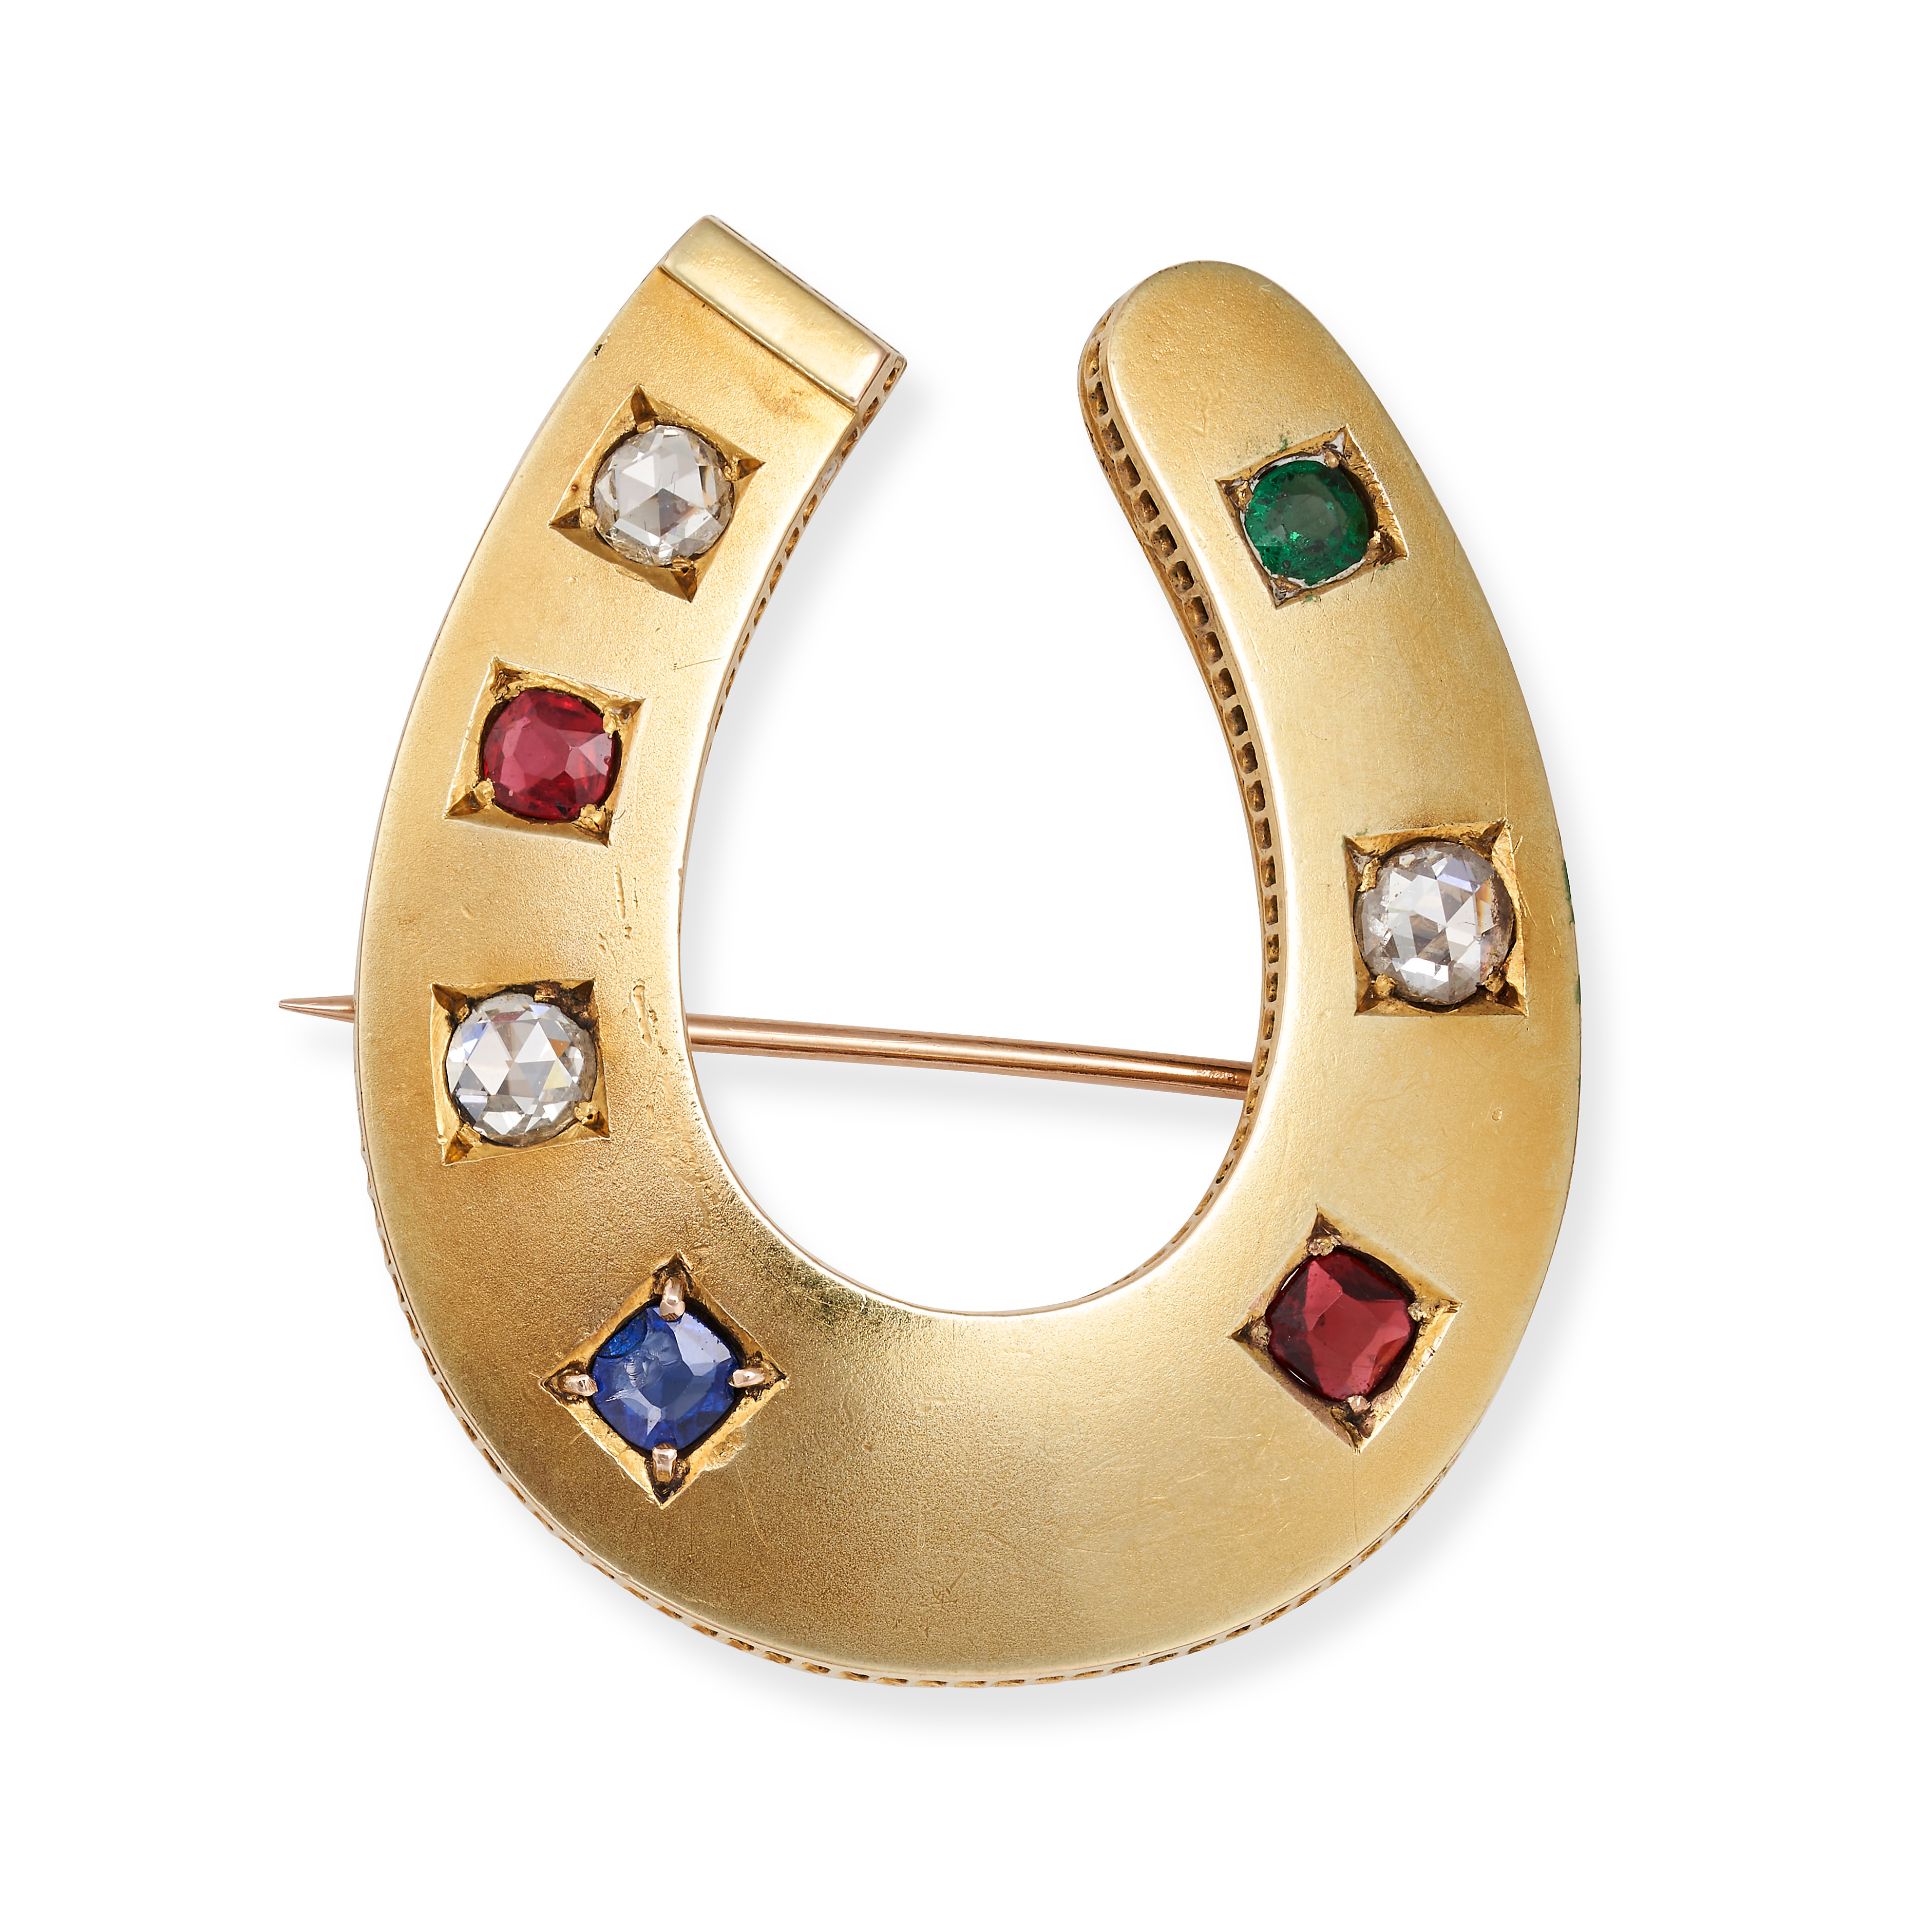 AN ANTIQUE DIAMOND AND PASTE HORSESHOE BROOCH in yellow gold, designed as a horseshoe set with ro...